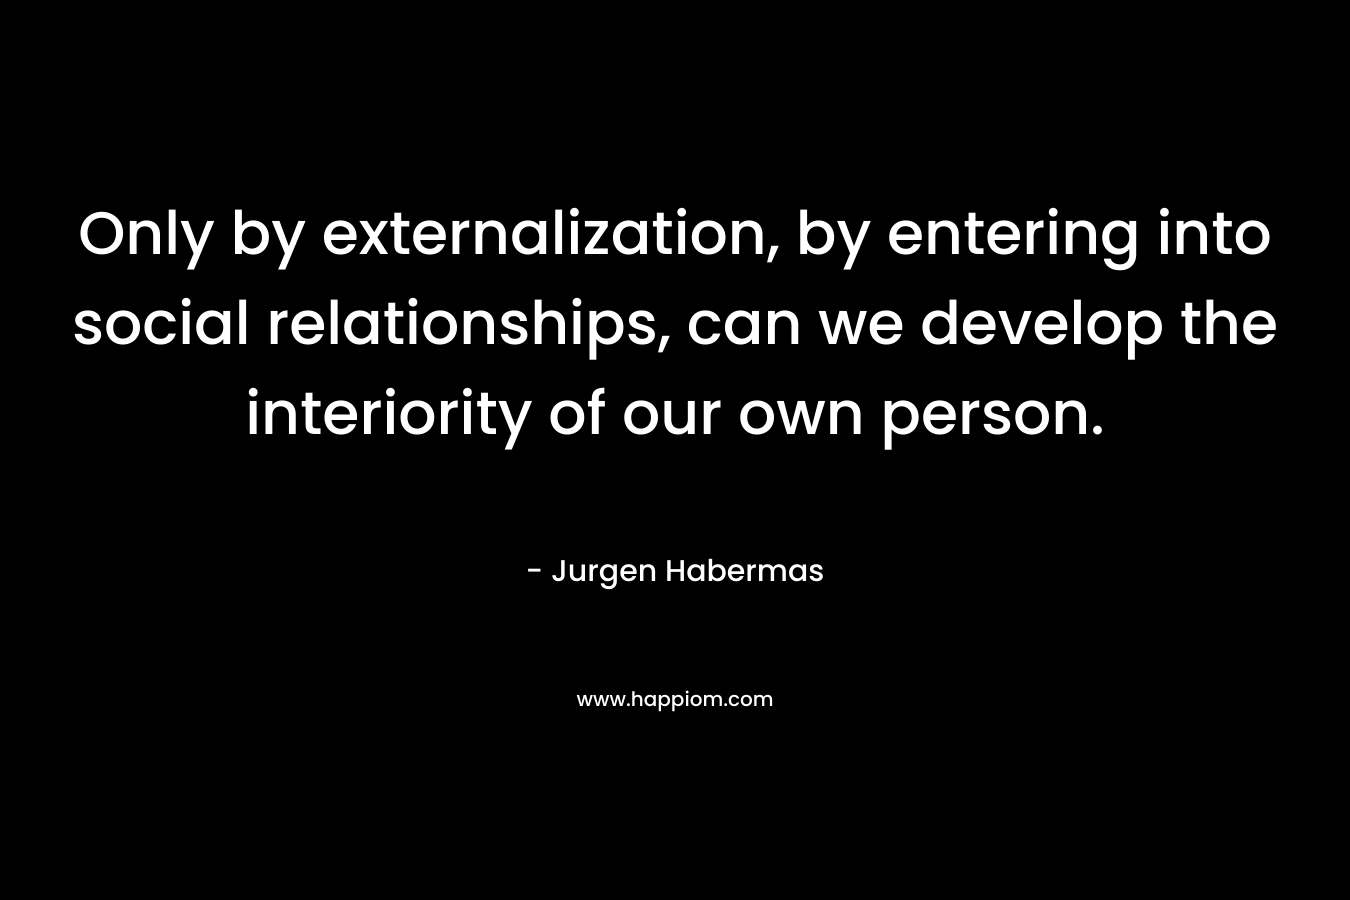 Only by externalization, by entering into social relationships, can we develop the interiority of our own person.